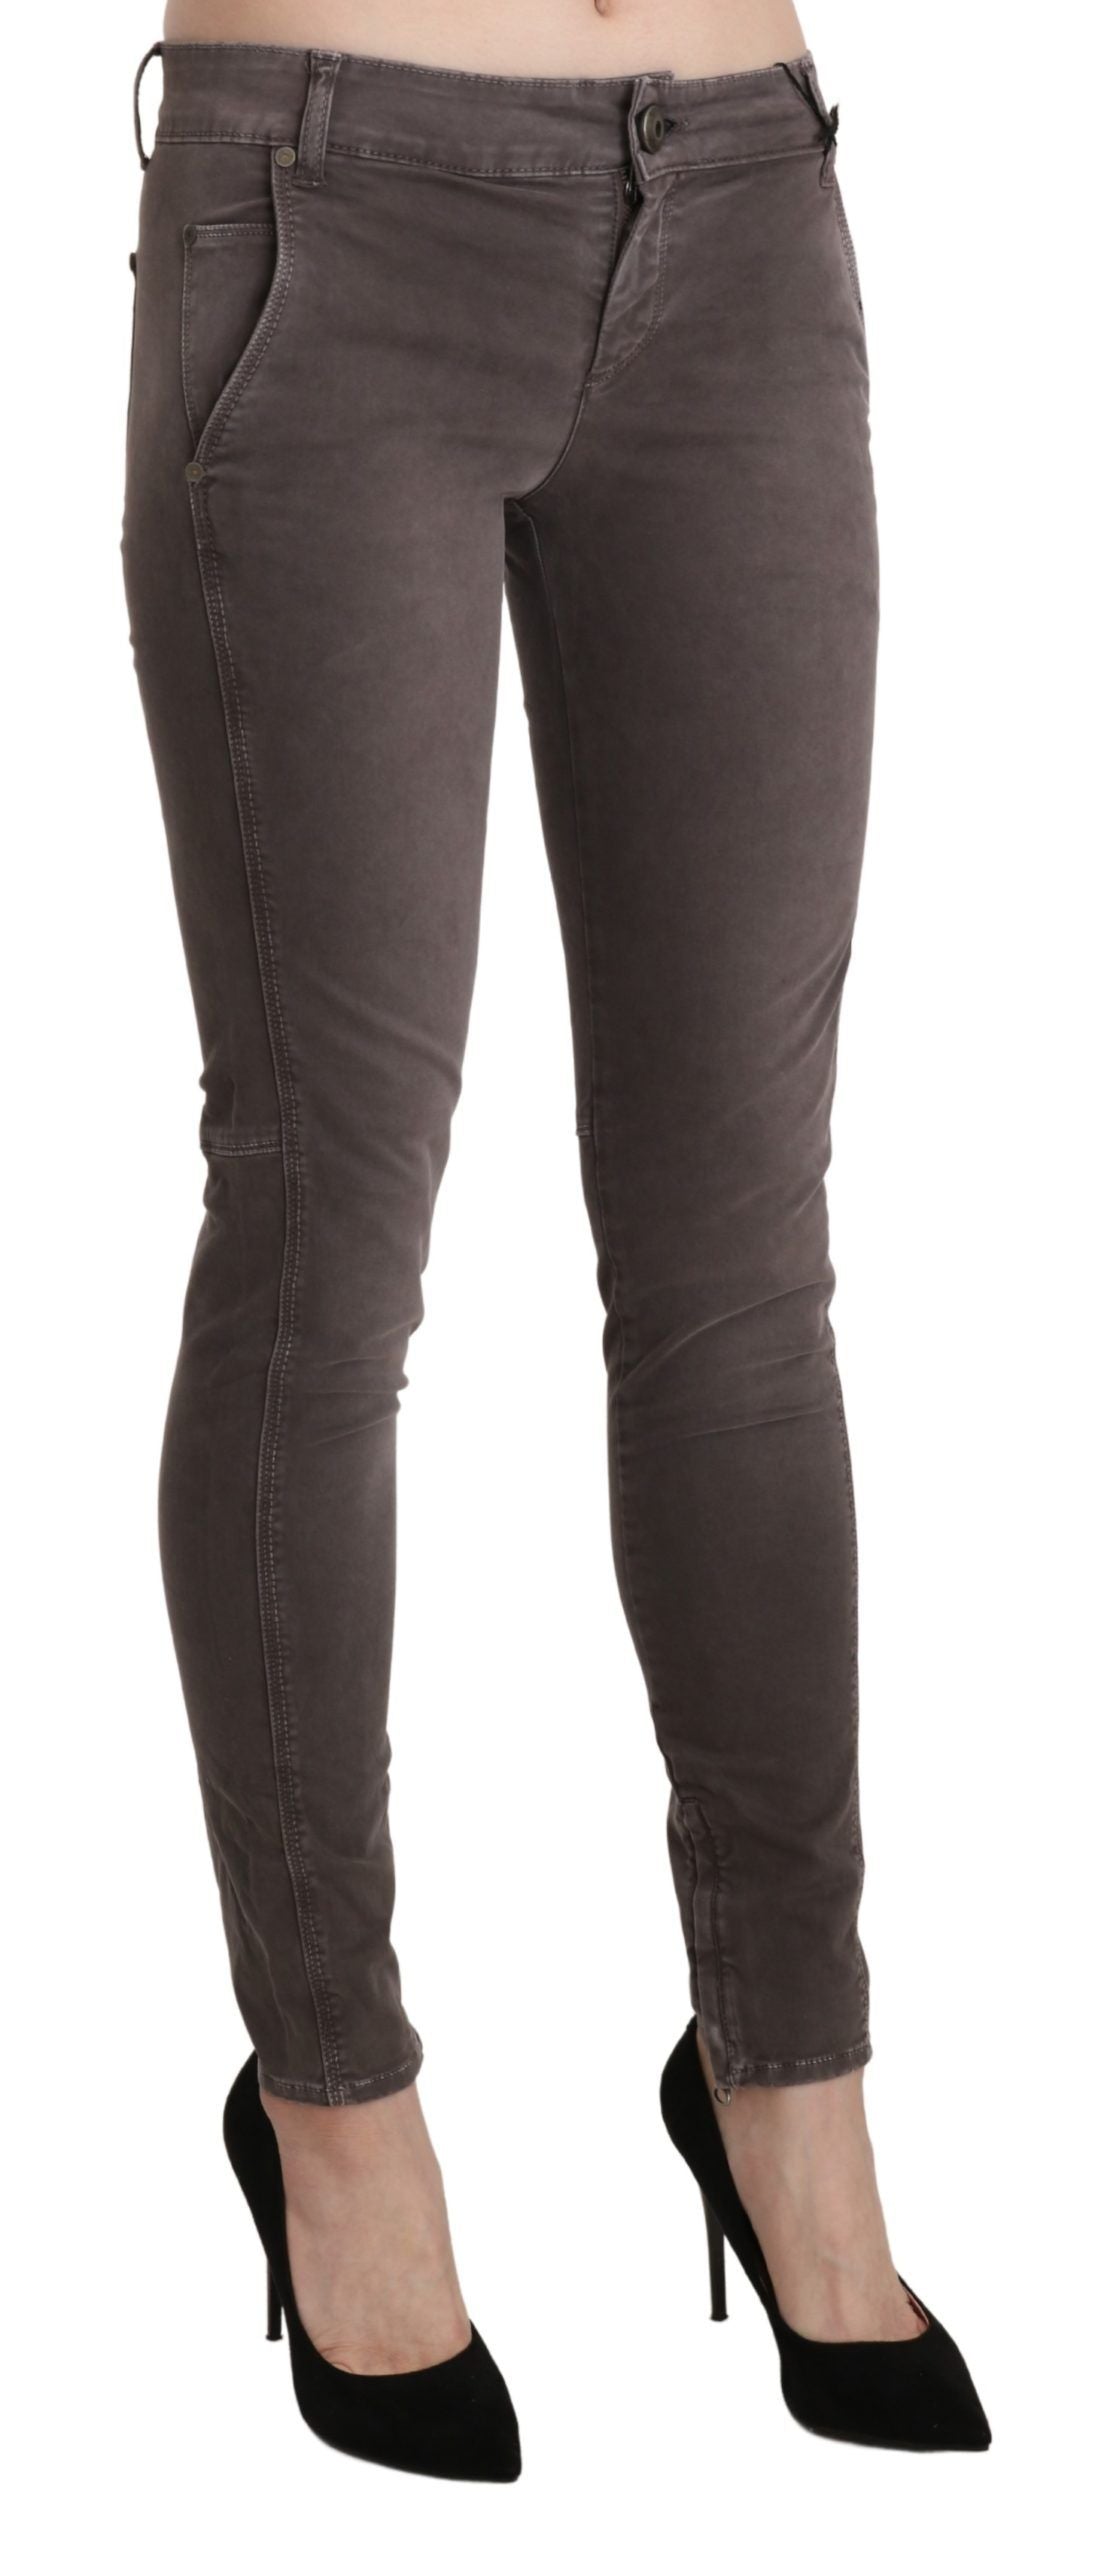 Ermanno Scervino Chic Brown Low Waist Skinny Trousers